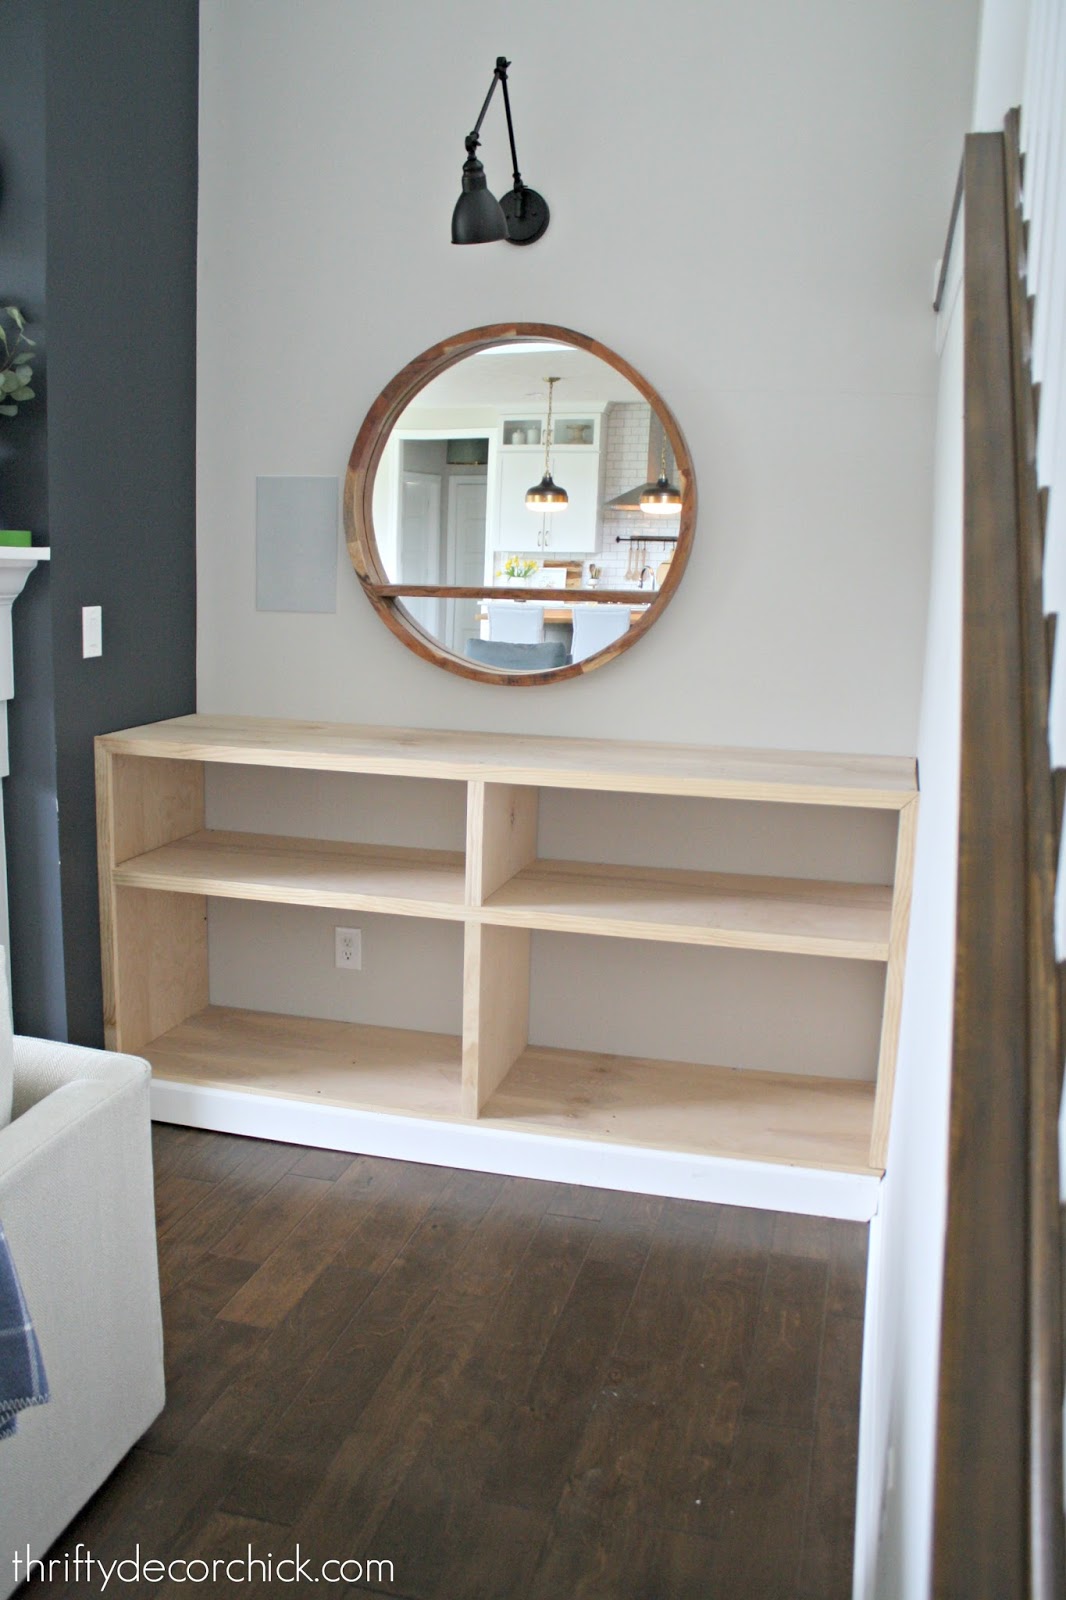 Diy Bookcases By The Fireplace, How To Build Bookcase Next Fireplace